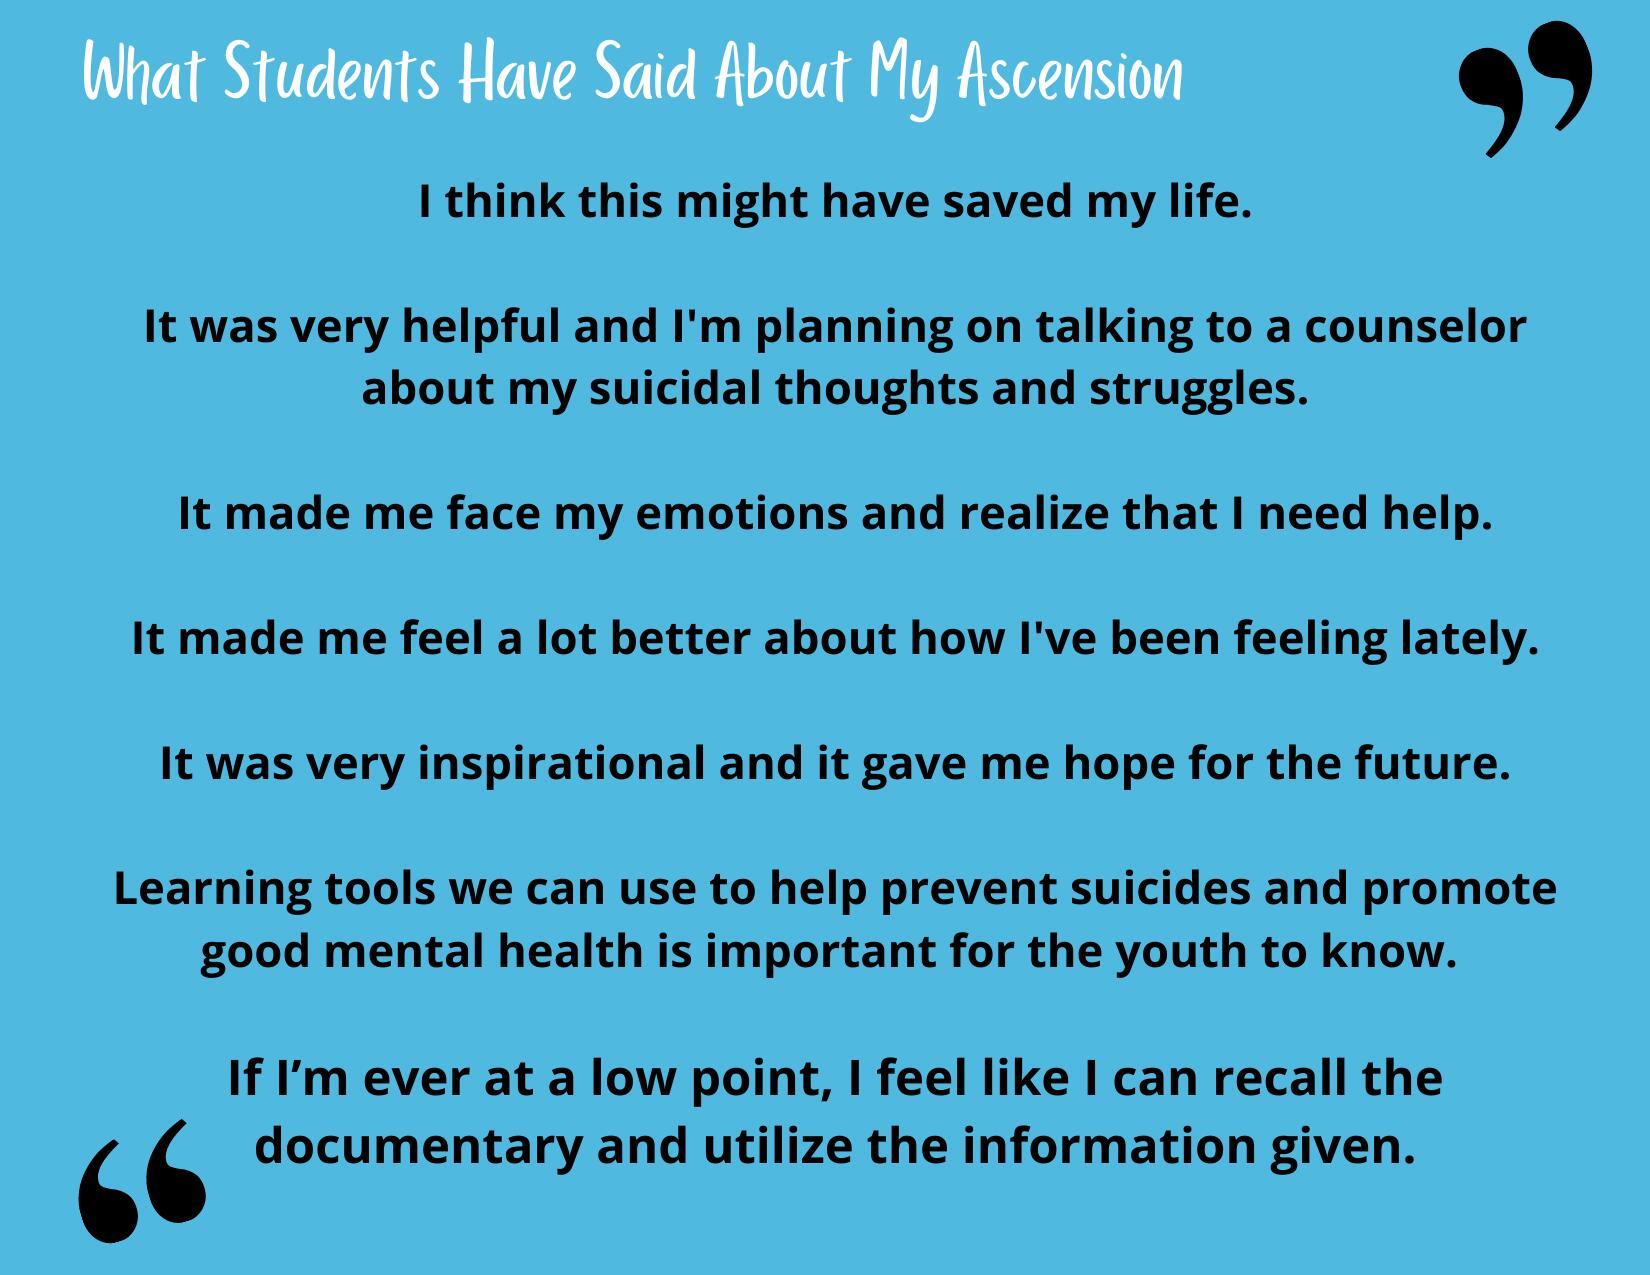 What students have said about My Ascension 1